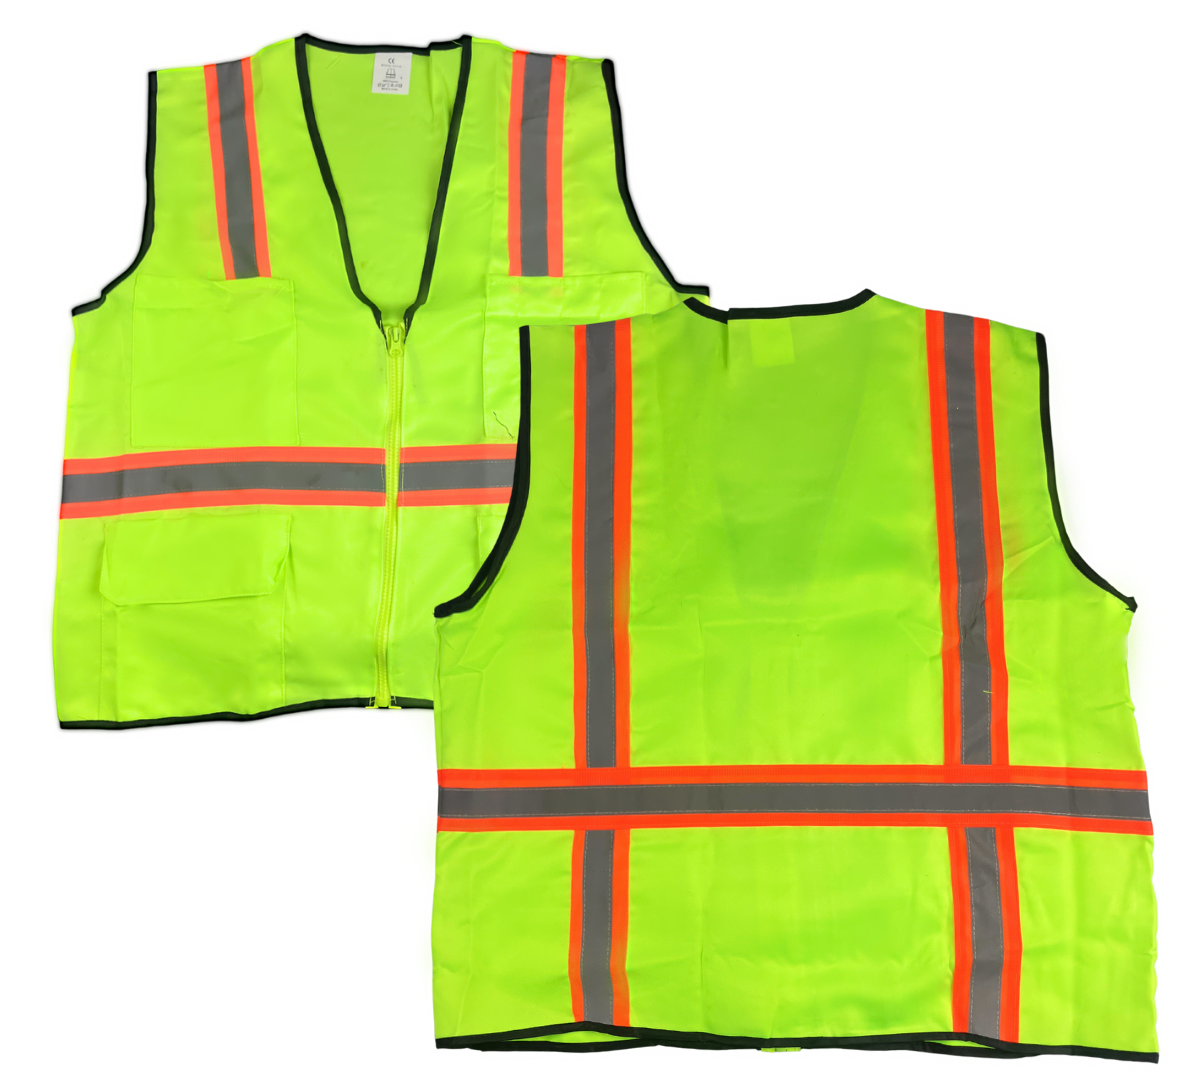 Bright Neon Green Safety Vest - Adult Size Medium  - SF-53718